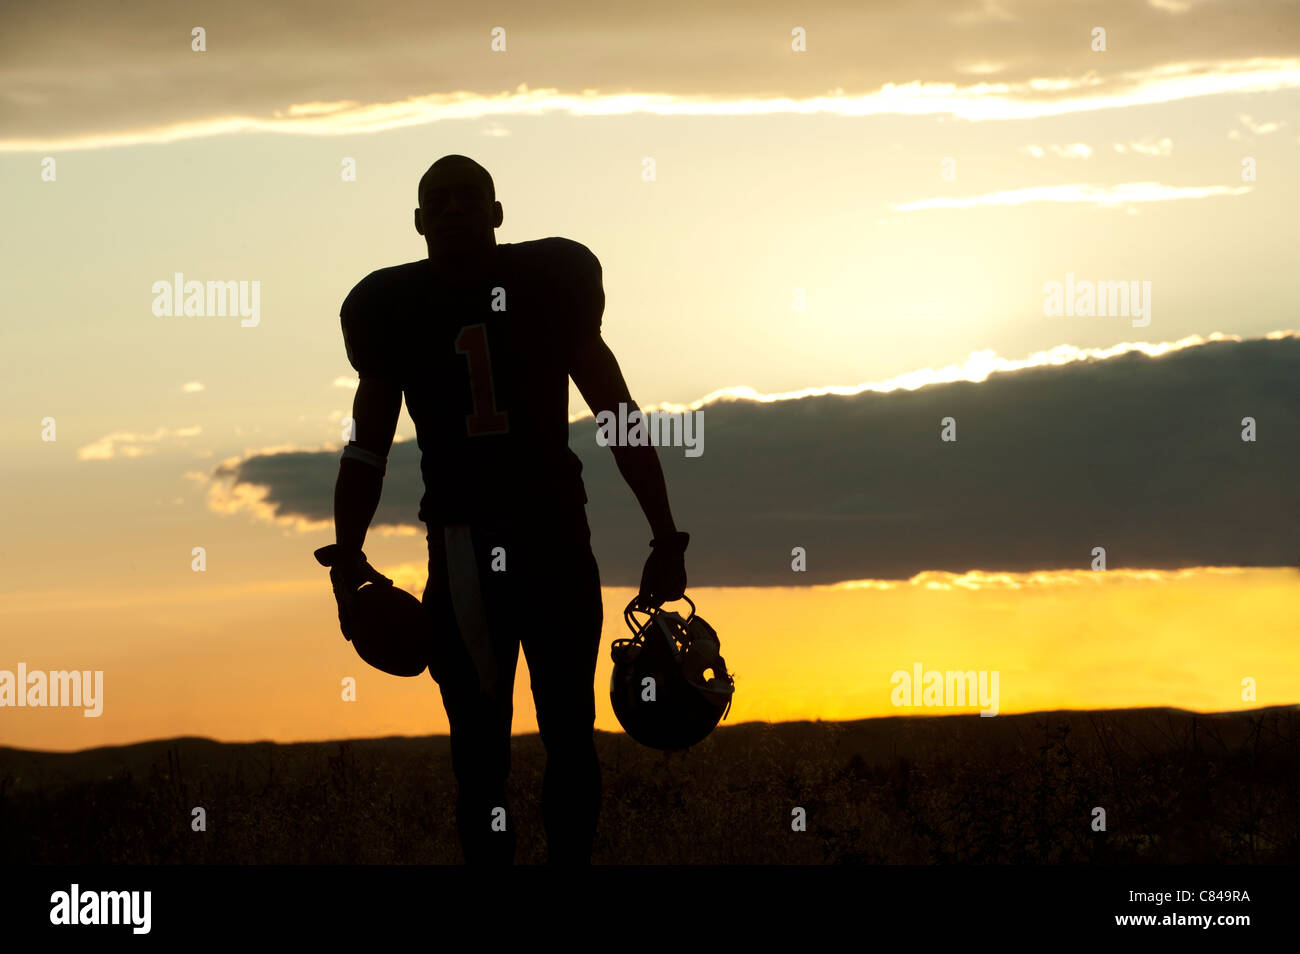 Silhouette of Black football player carrying helmet and football Stock Photo